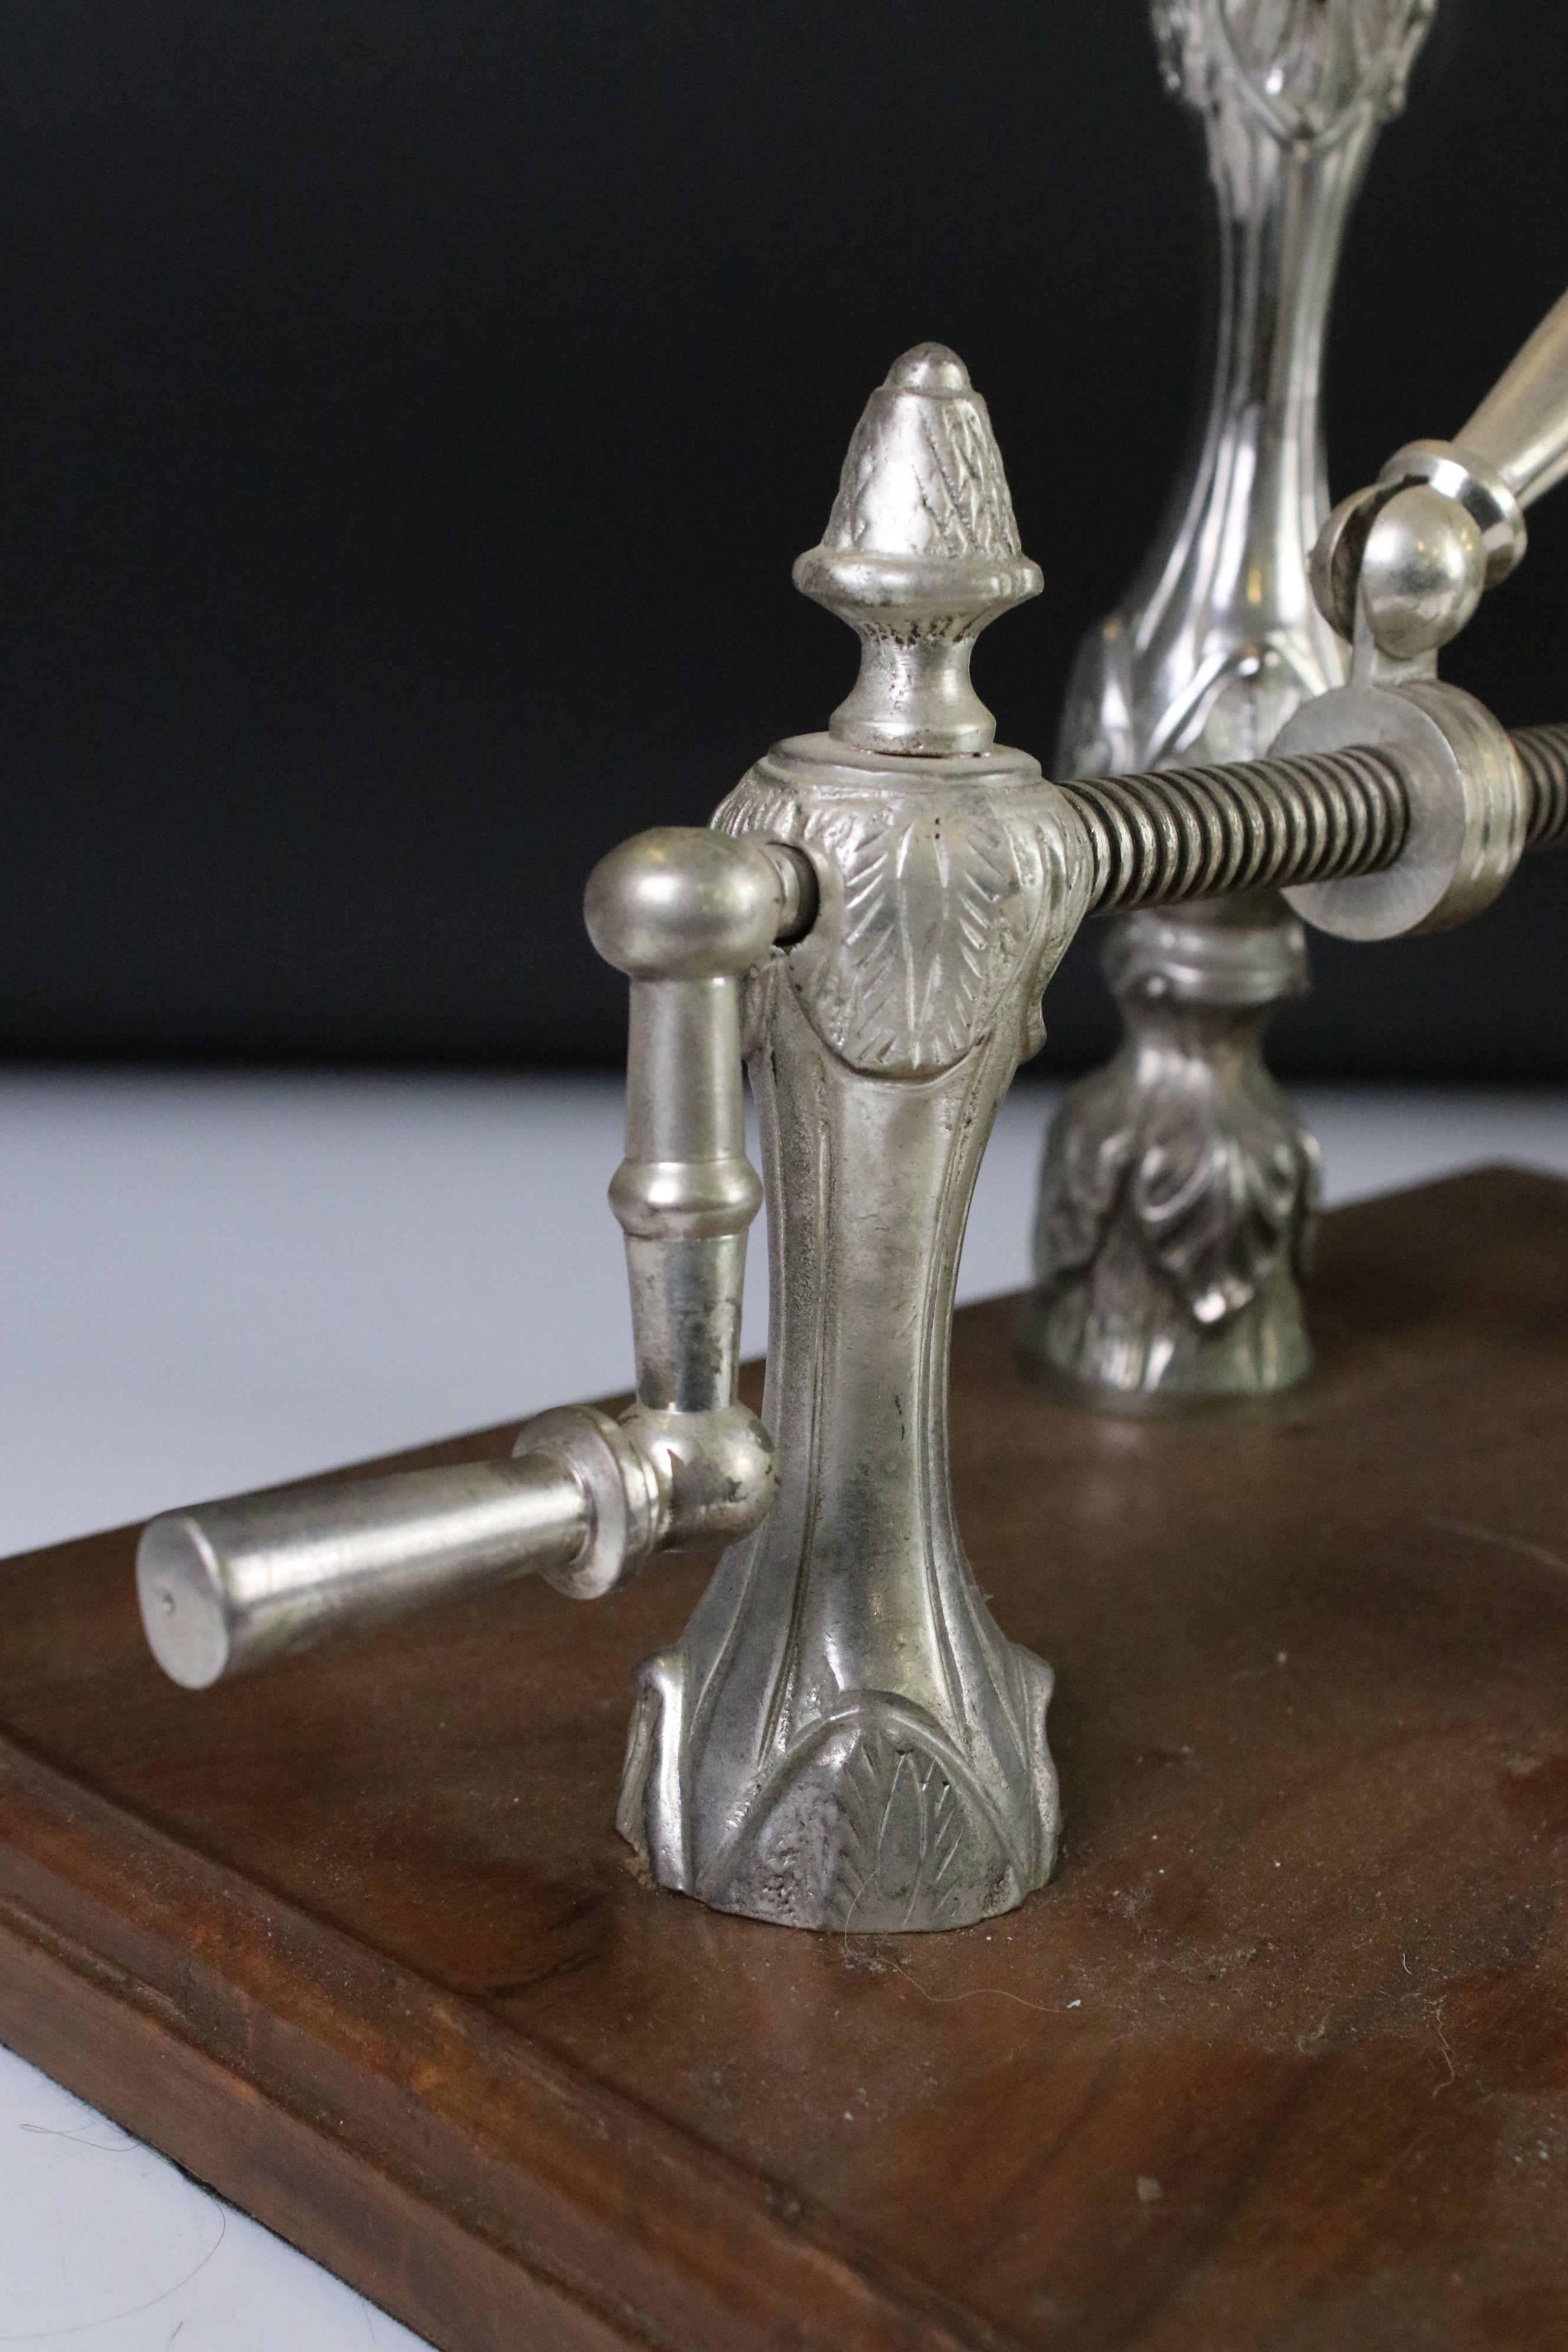 White Metal Mechanised Wine / Port Bottle Pourer with handle operating a ratchet, raised on a wooden - Image 4 of 5